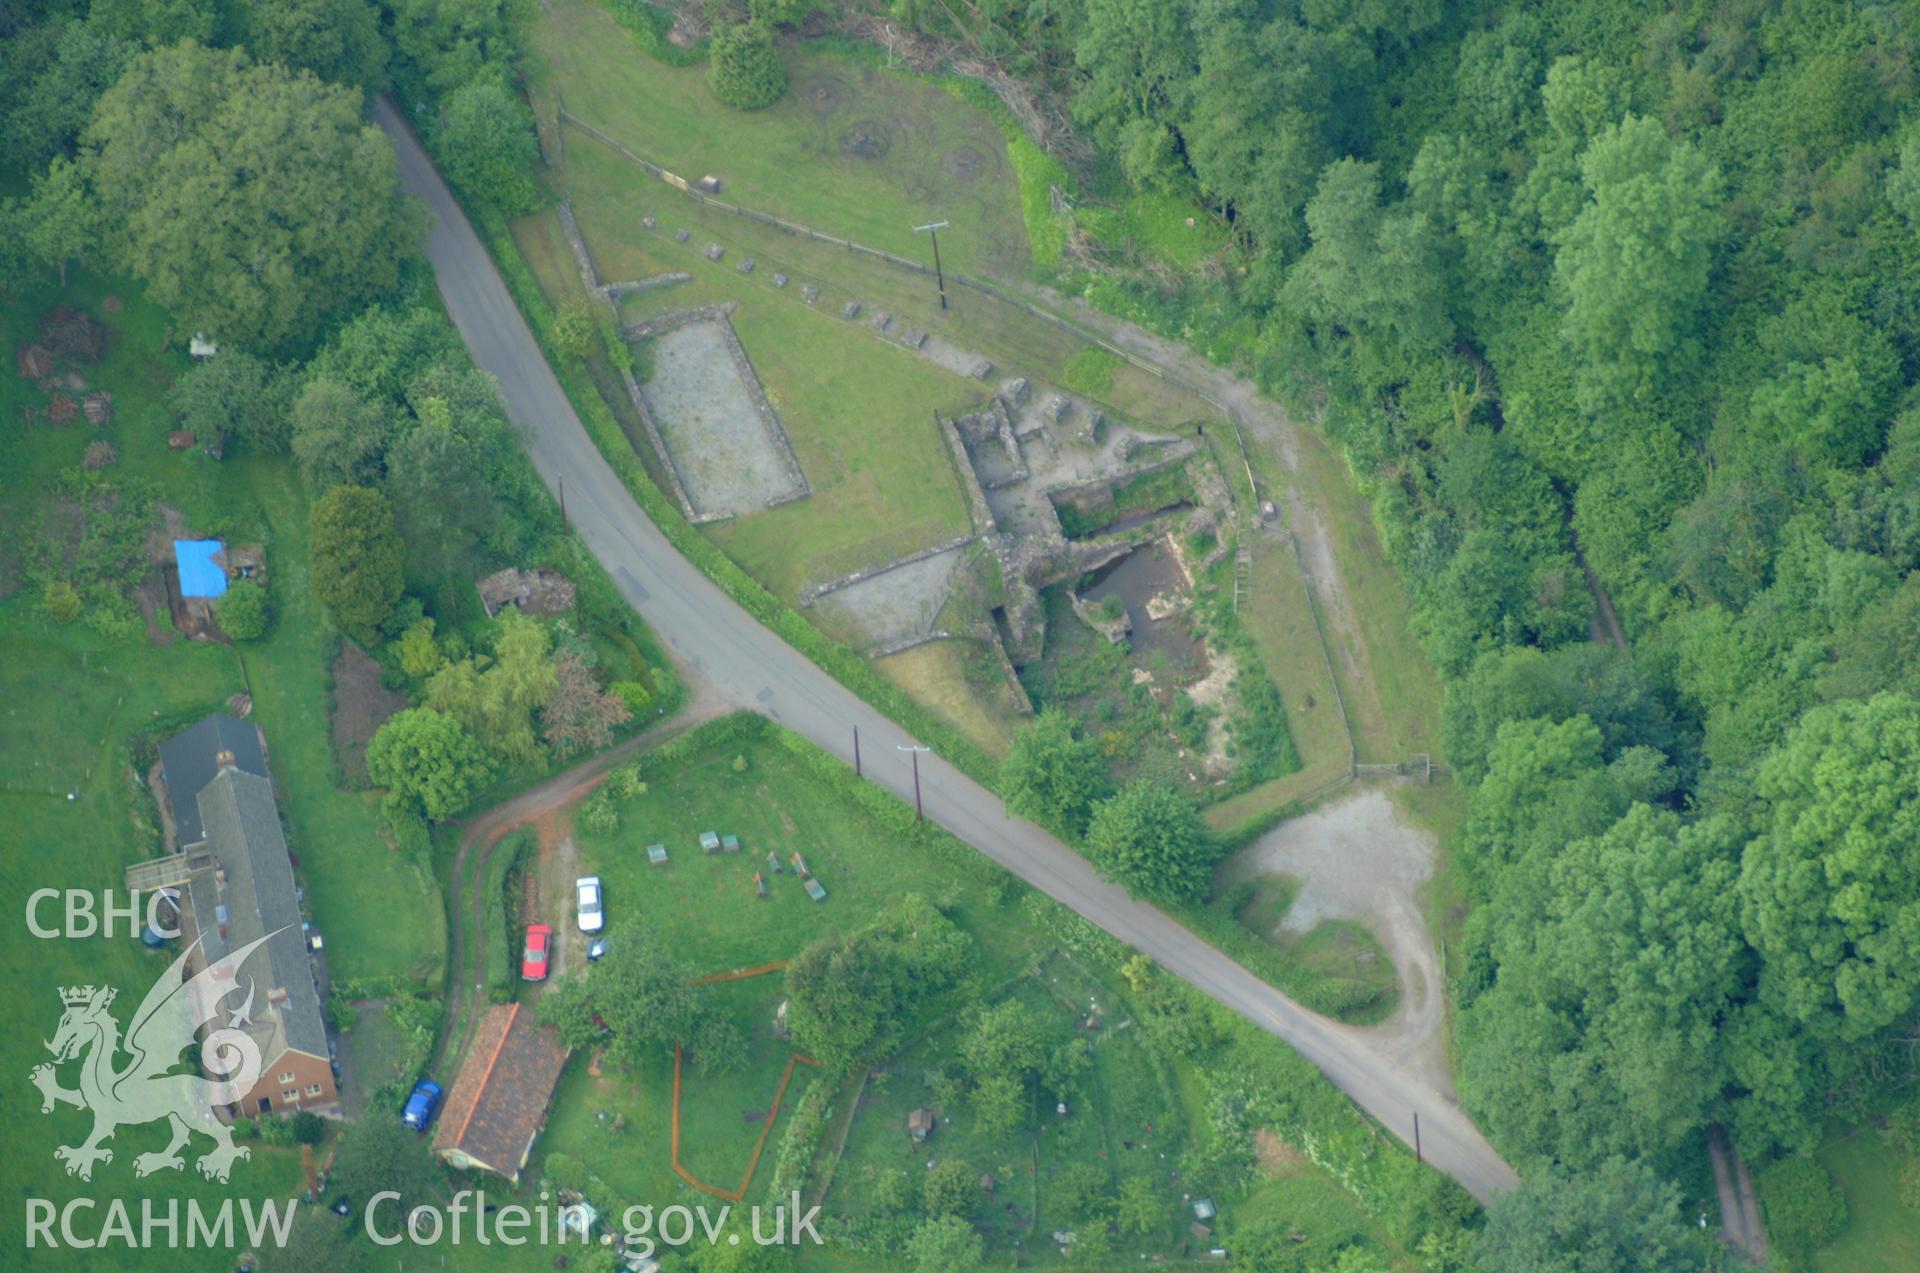 RCAHMW colour oblique aerial photograph of Tintern Blast Furnace taken on 02/06/2004 by Toby Driver